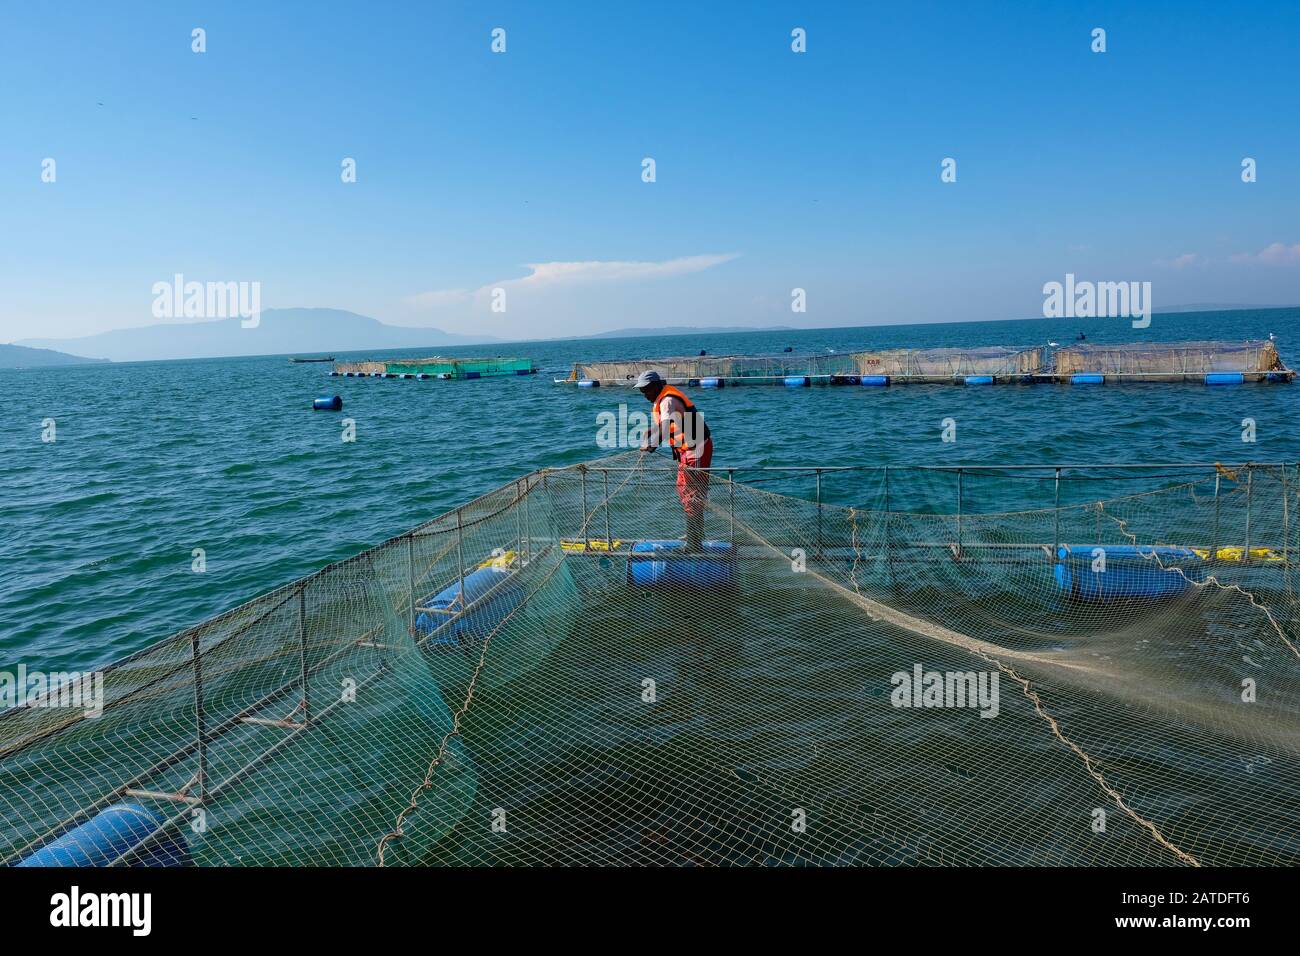 An employee of Victory Farms, the largest fish farmer in Kenya, fixes netting on a fish cage in Lake Victoria Stock Photo